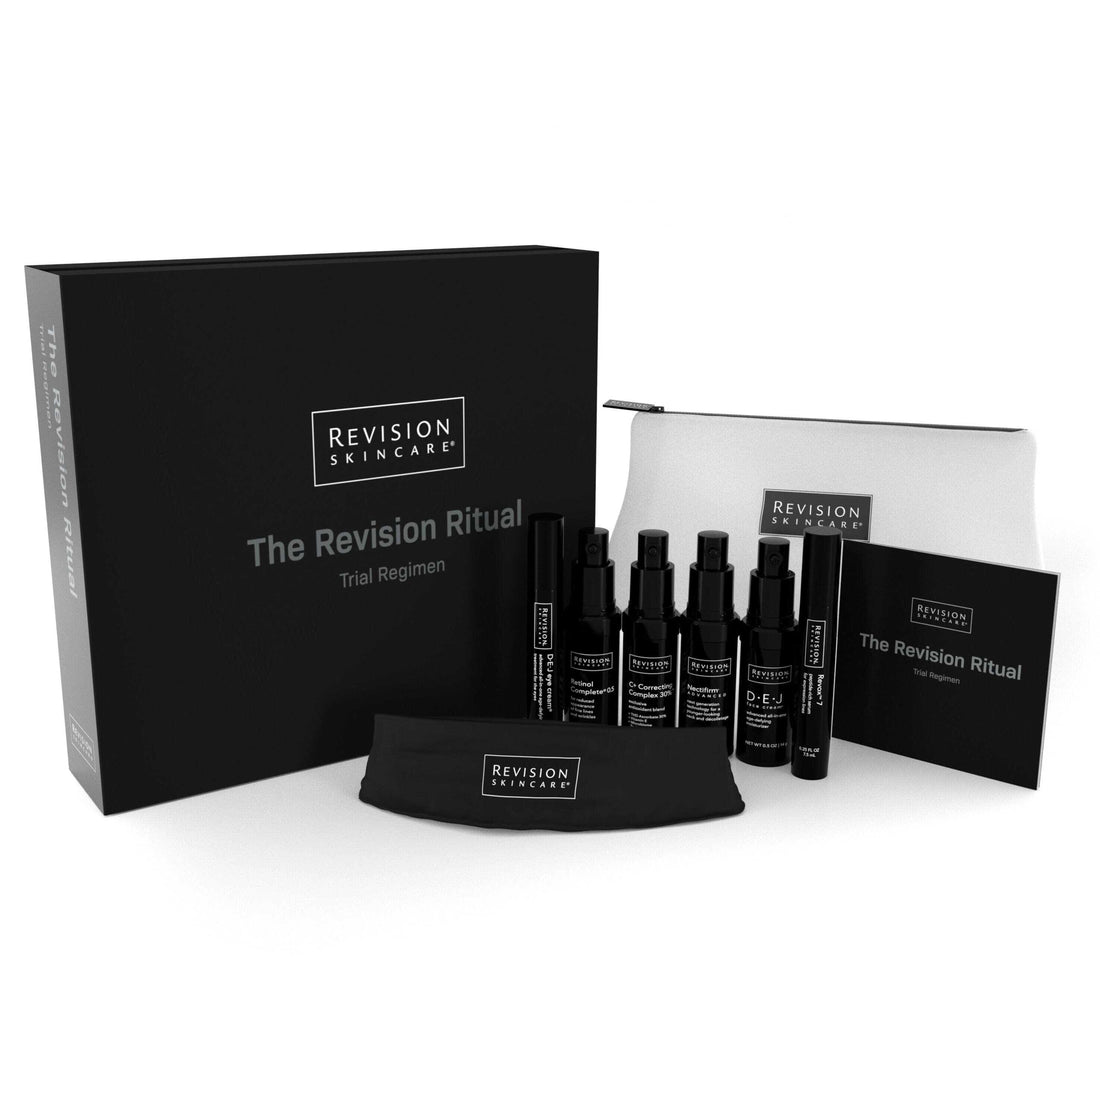 Revision Skincare The Revision Ritual Trial Regimen Revision Shop at Skin Type Solutions